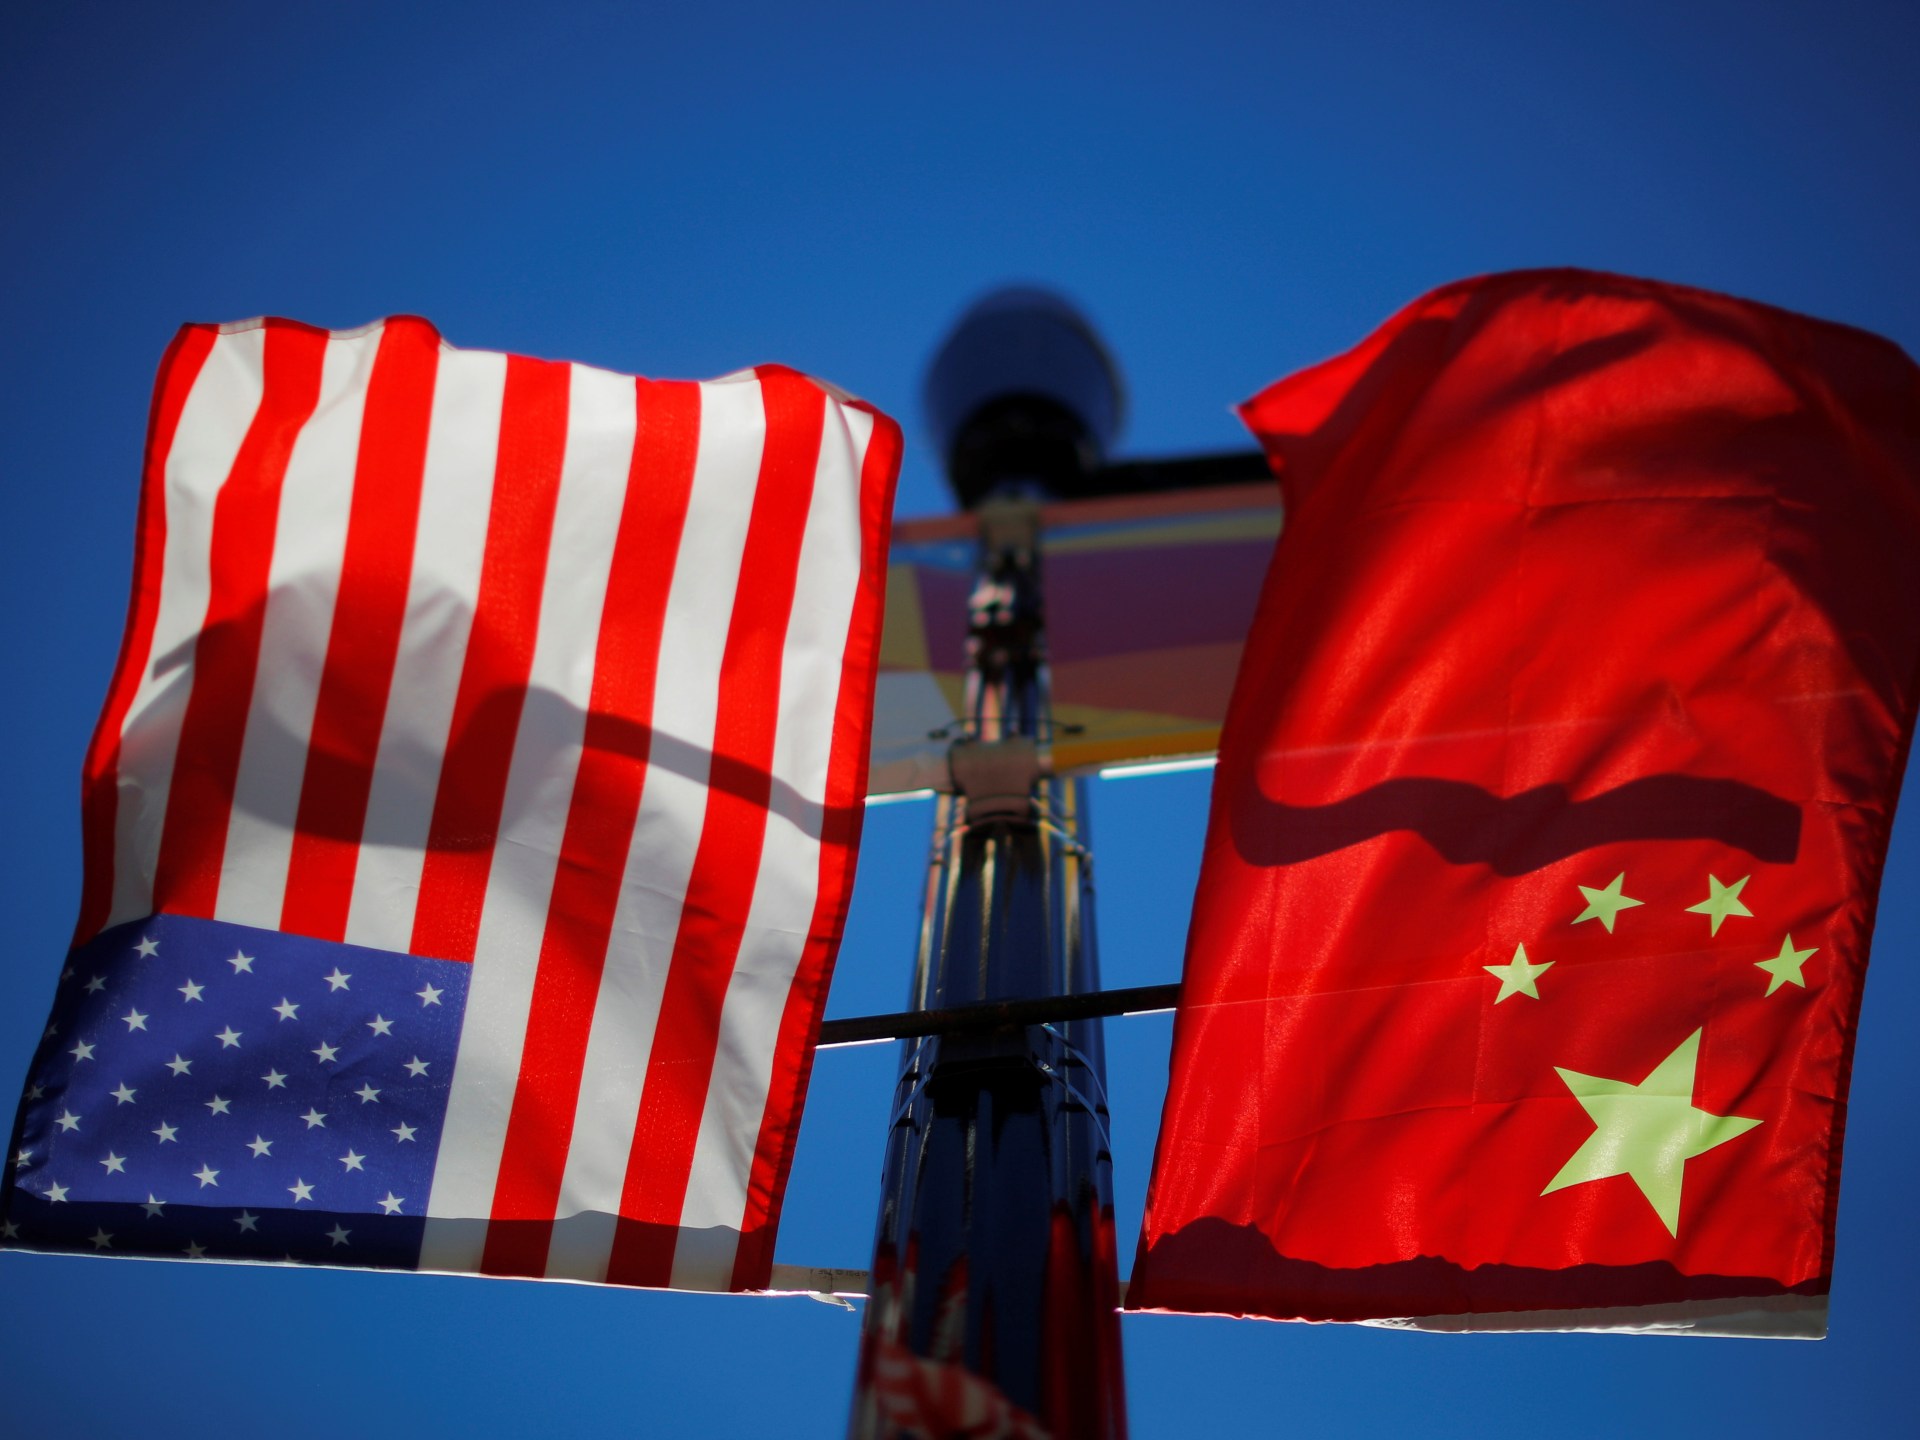 Majority in Southeast Asia would choose China over US, survey suggests